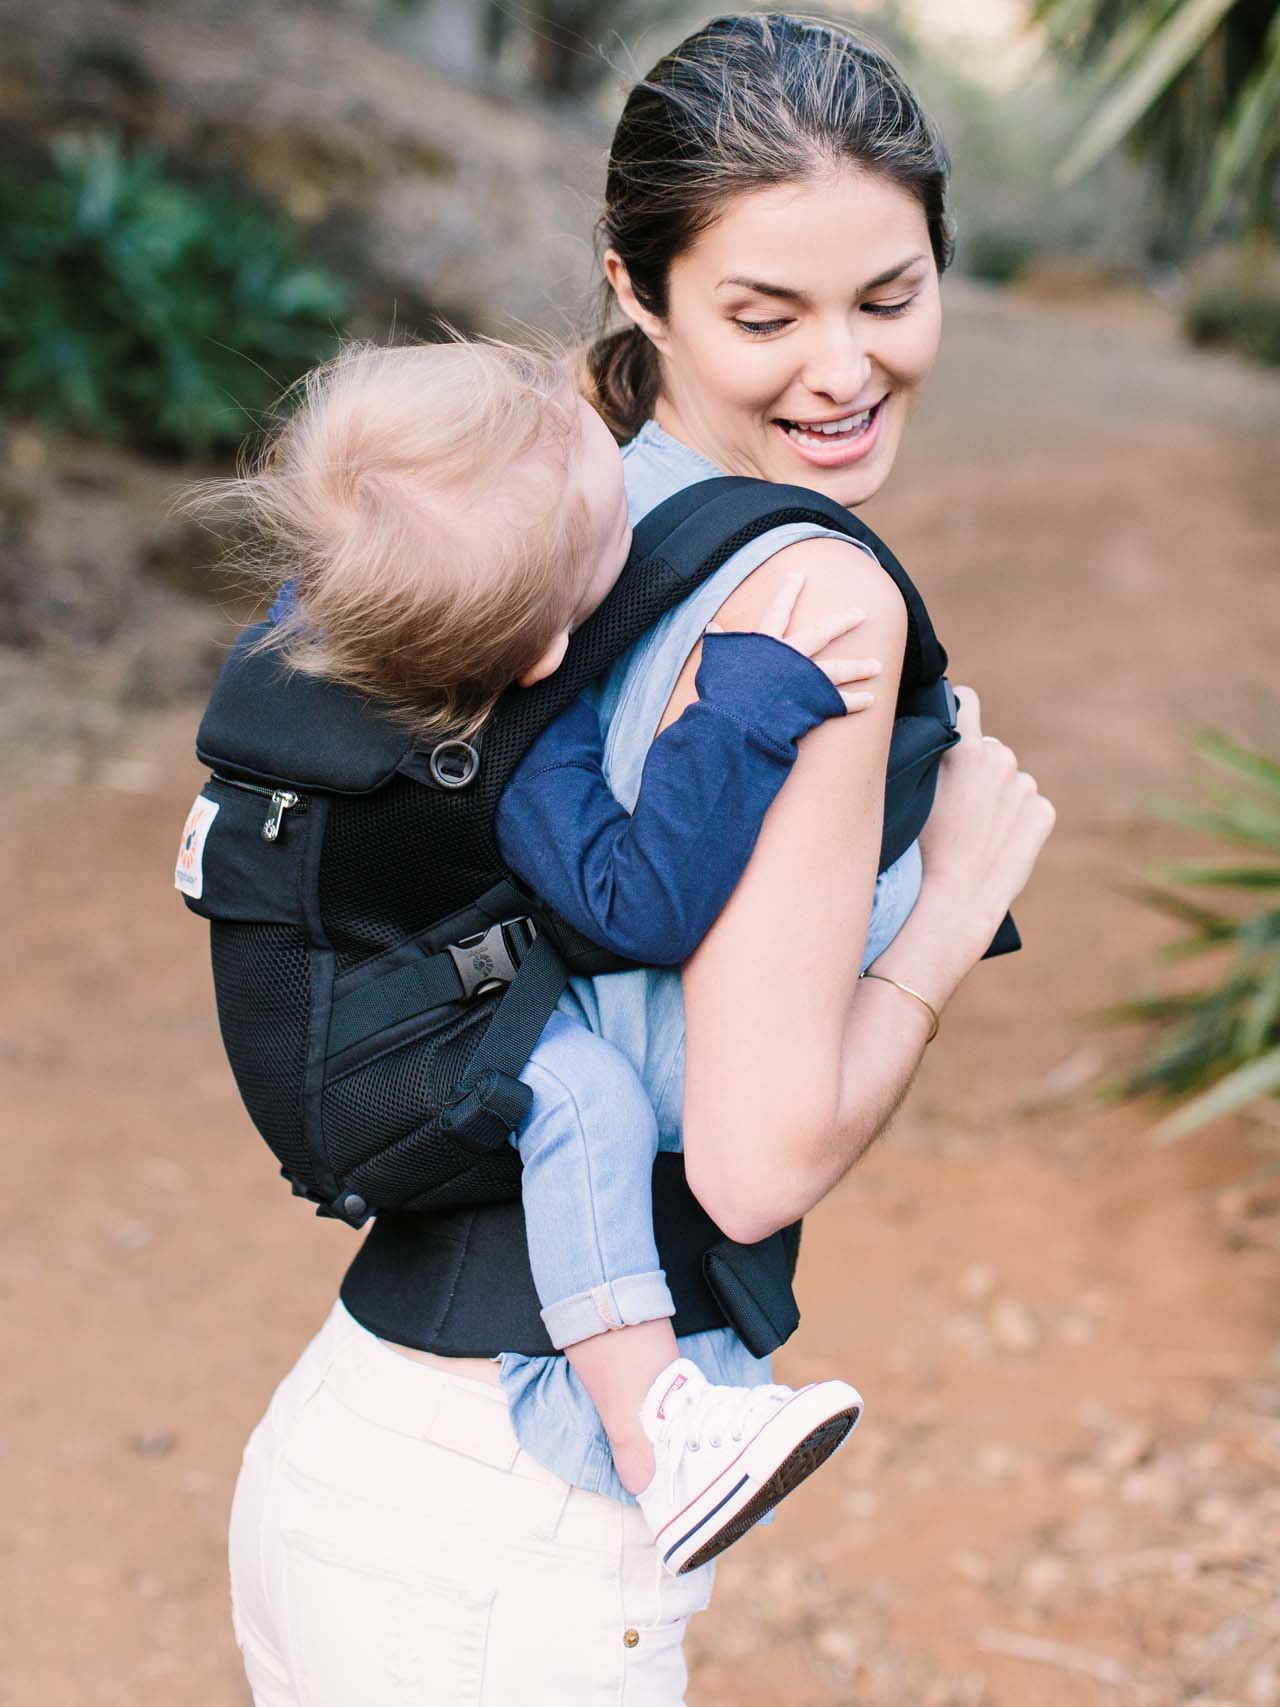 woman carrying a baby in an Ergobaby baby carrier